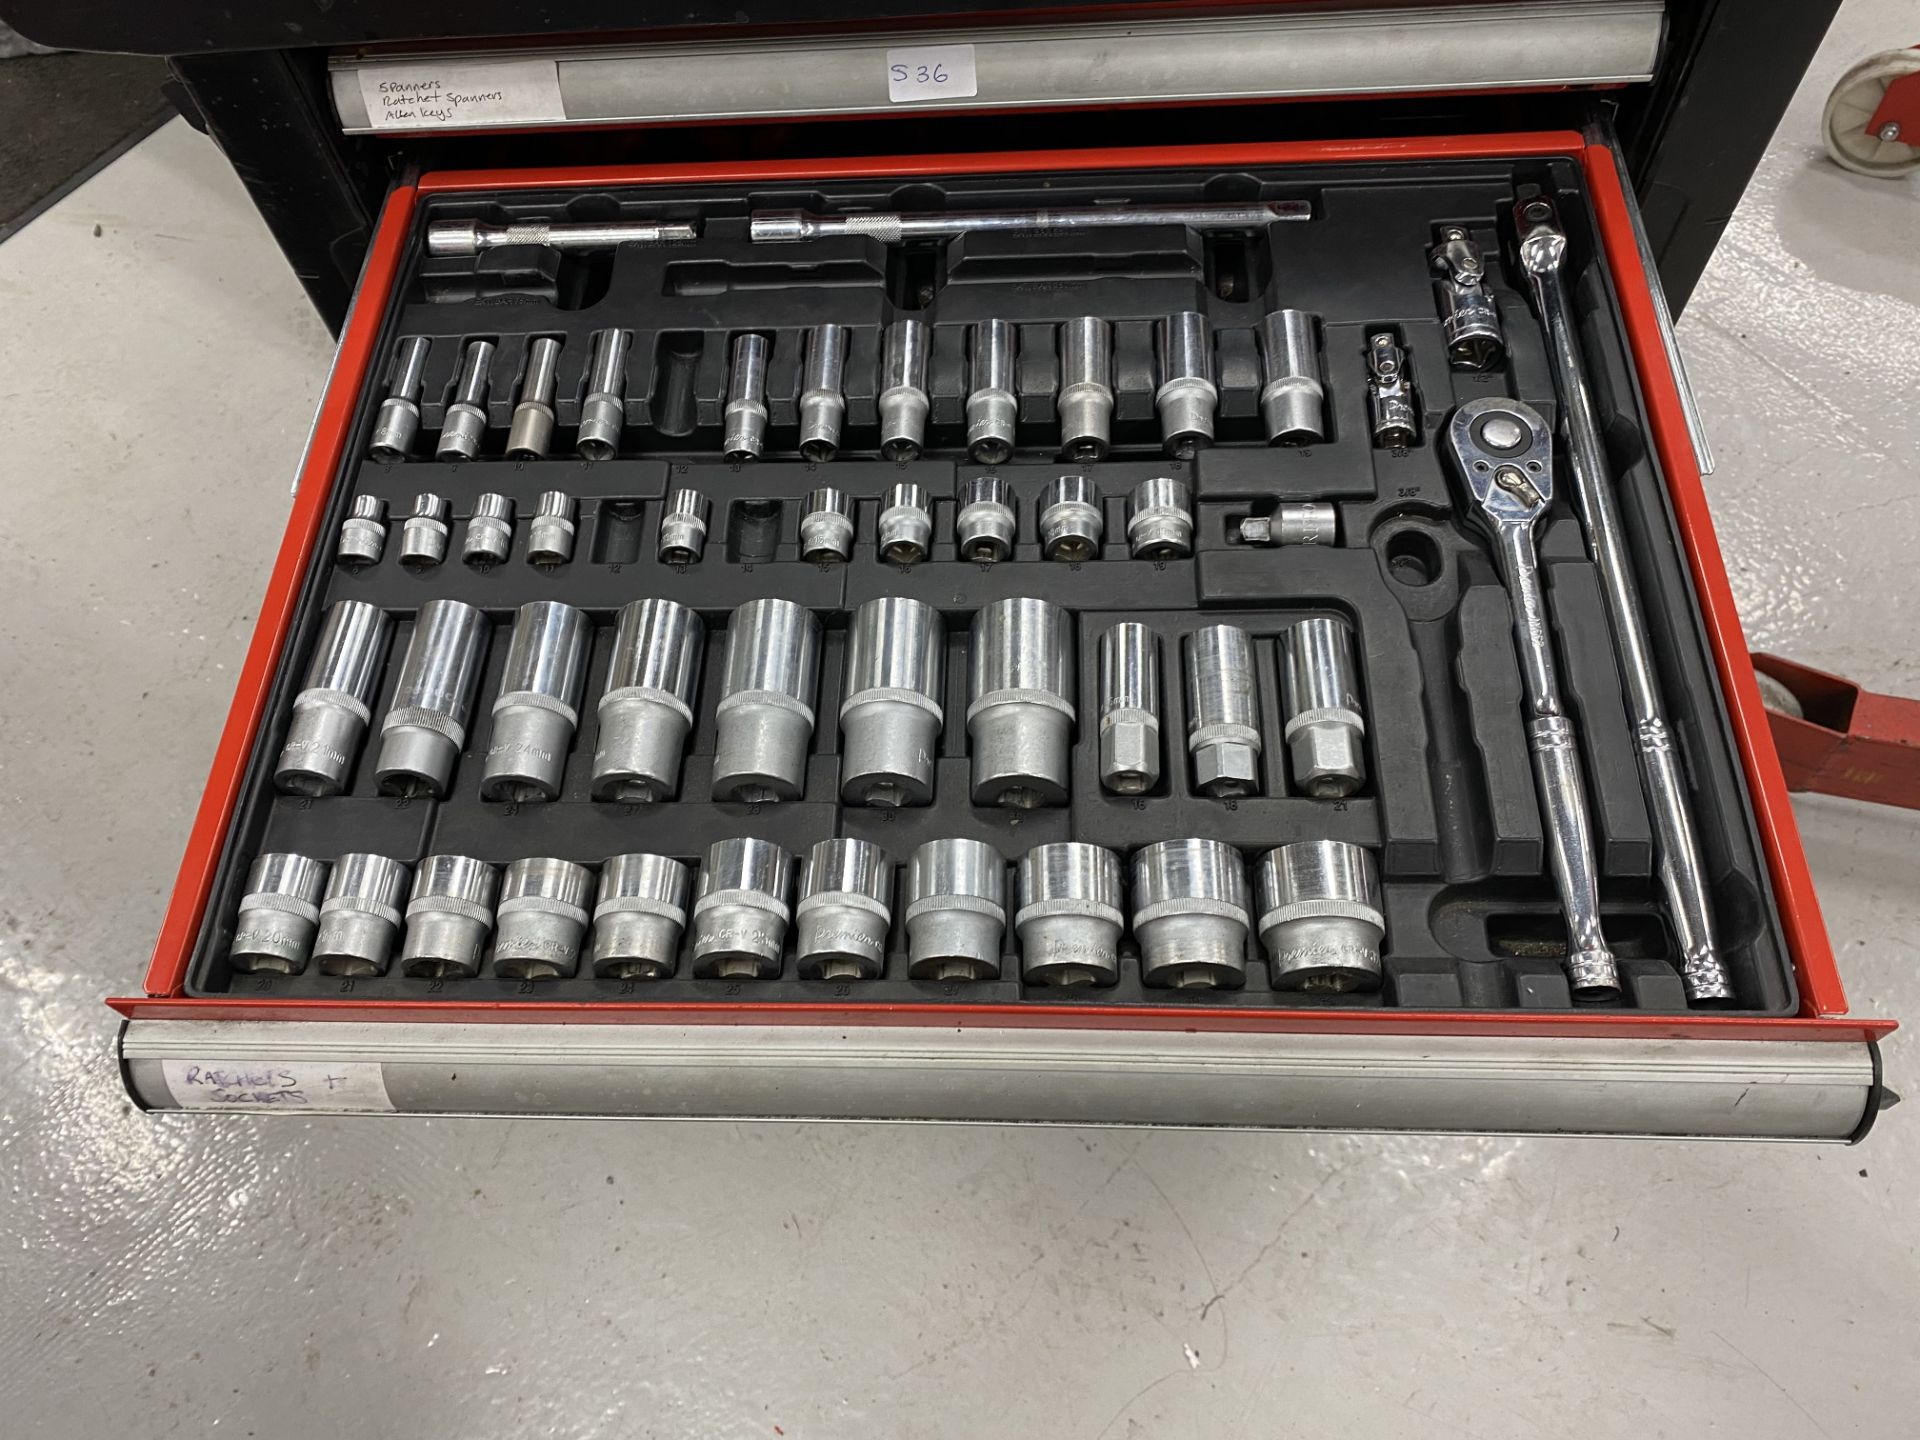 Sealey 10 drawer mobile toolbox including the following tools, rings and open ended spanners 7mm- - Image 3 of 11